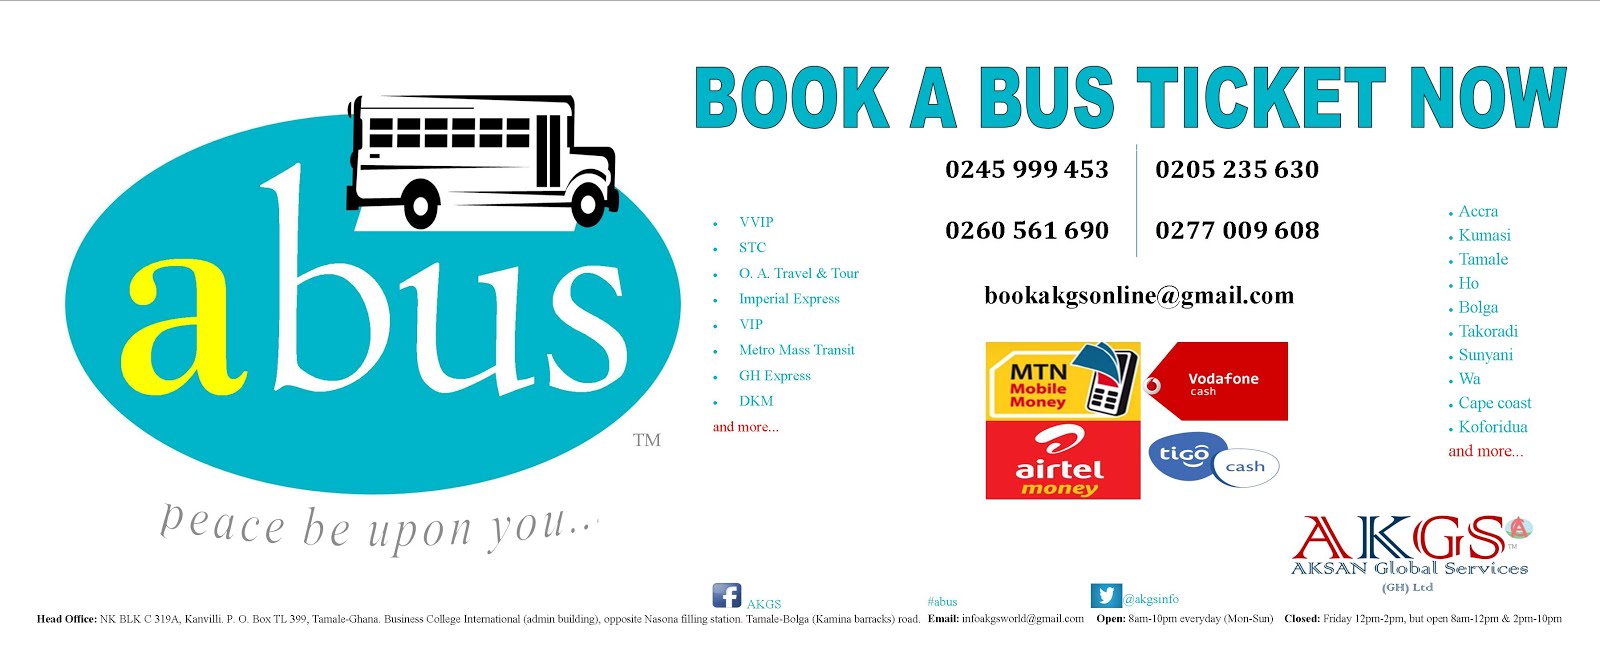 BOOK A BUS TICKET NOW